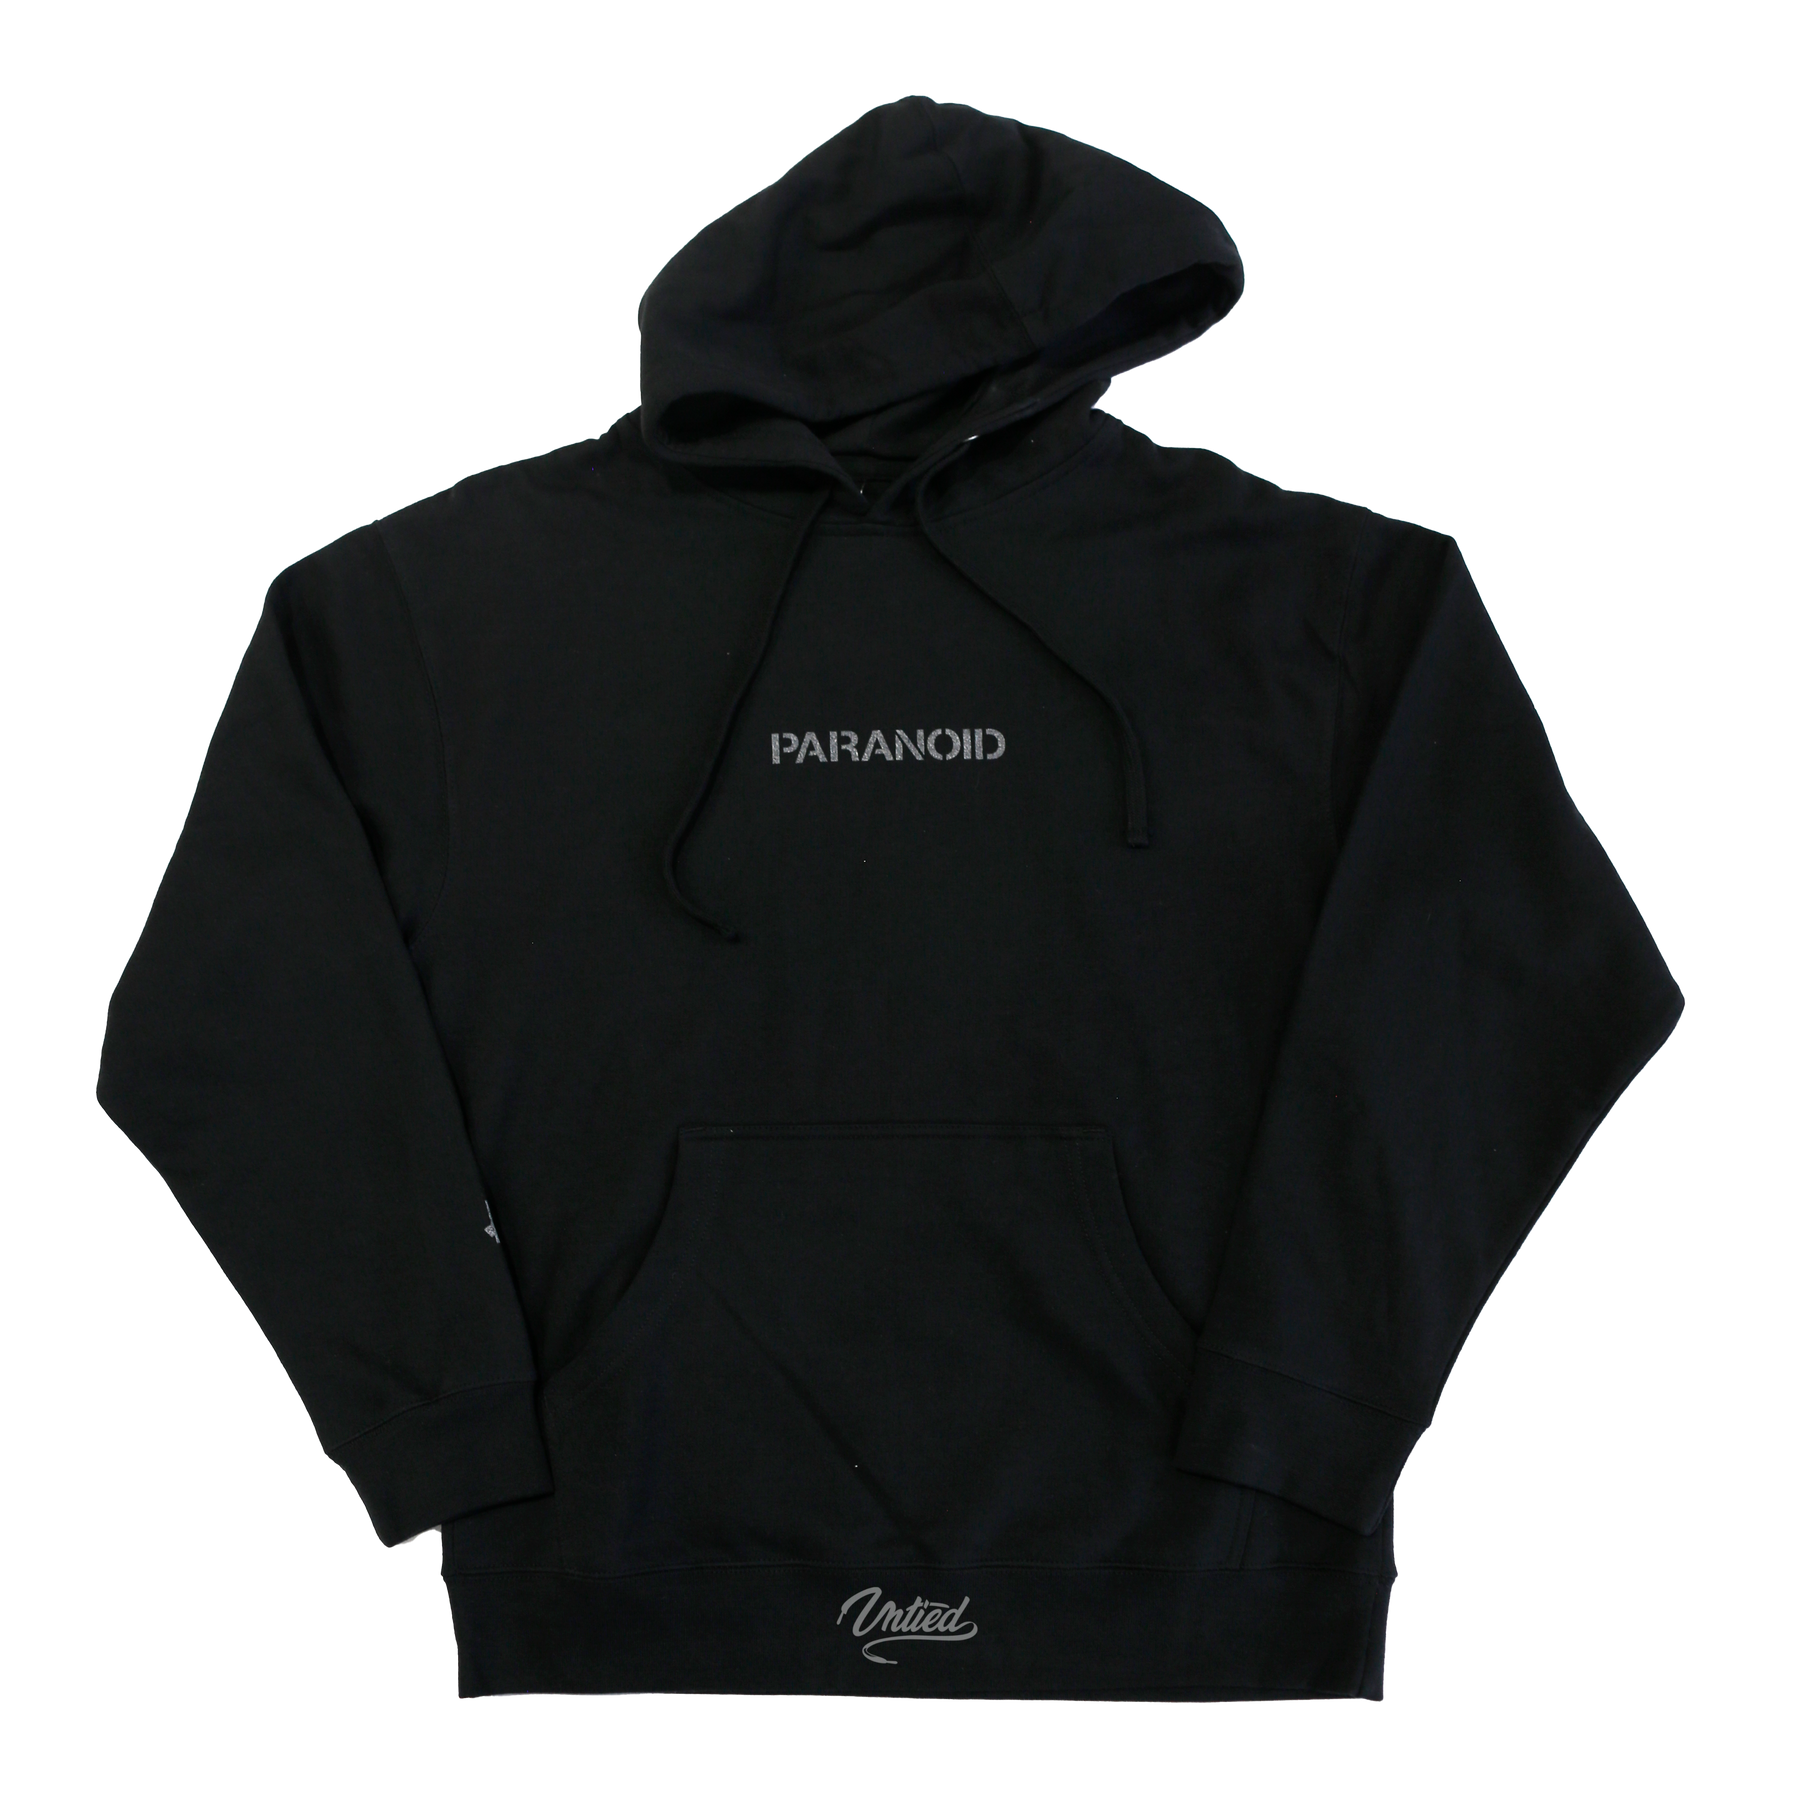 ASSC x Undefeated Paranoid Hoodie "Black 3M Reflective"